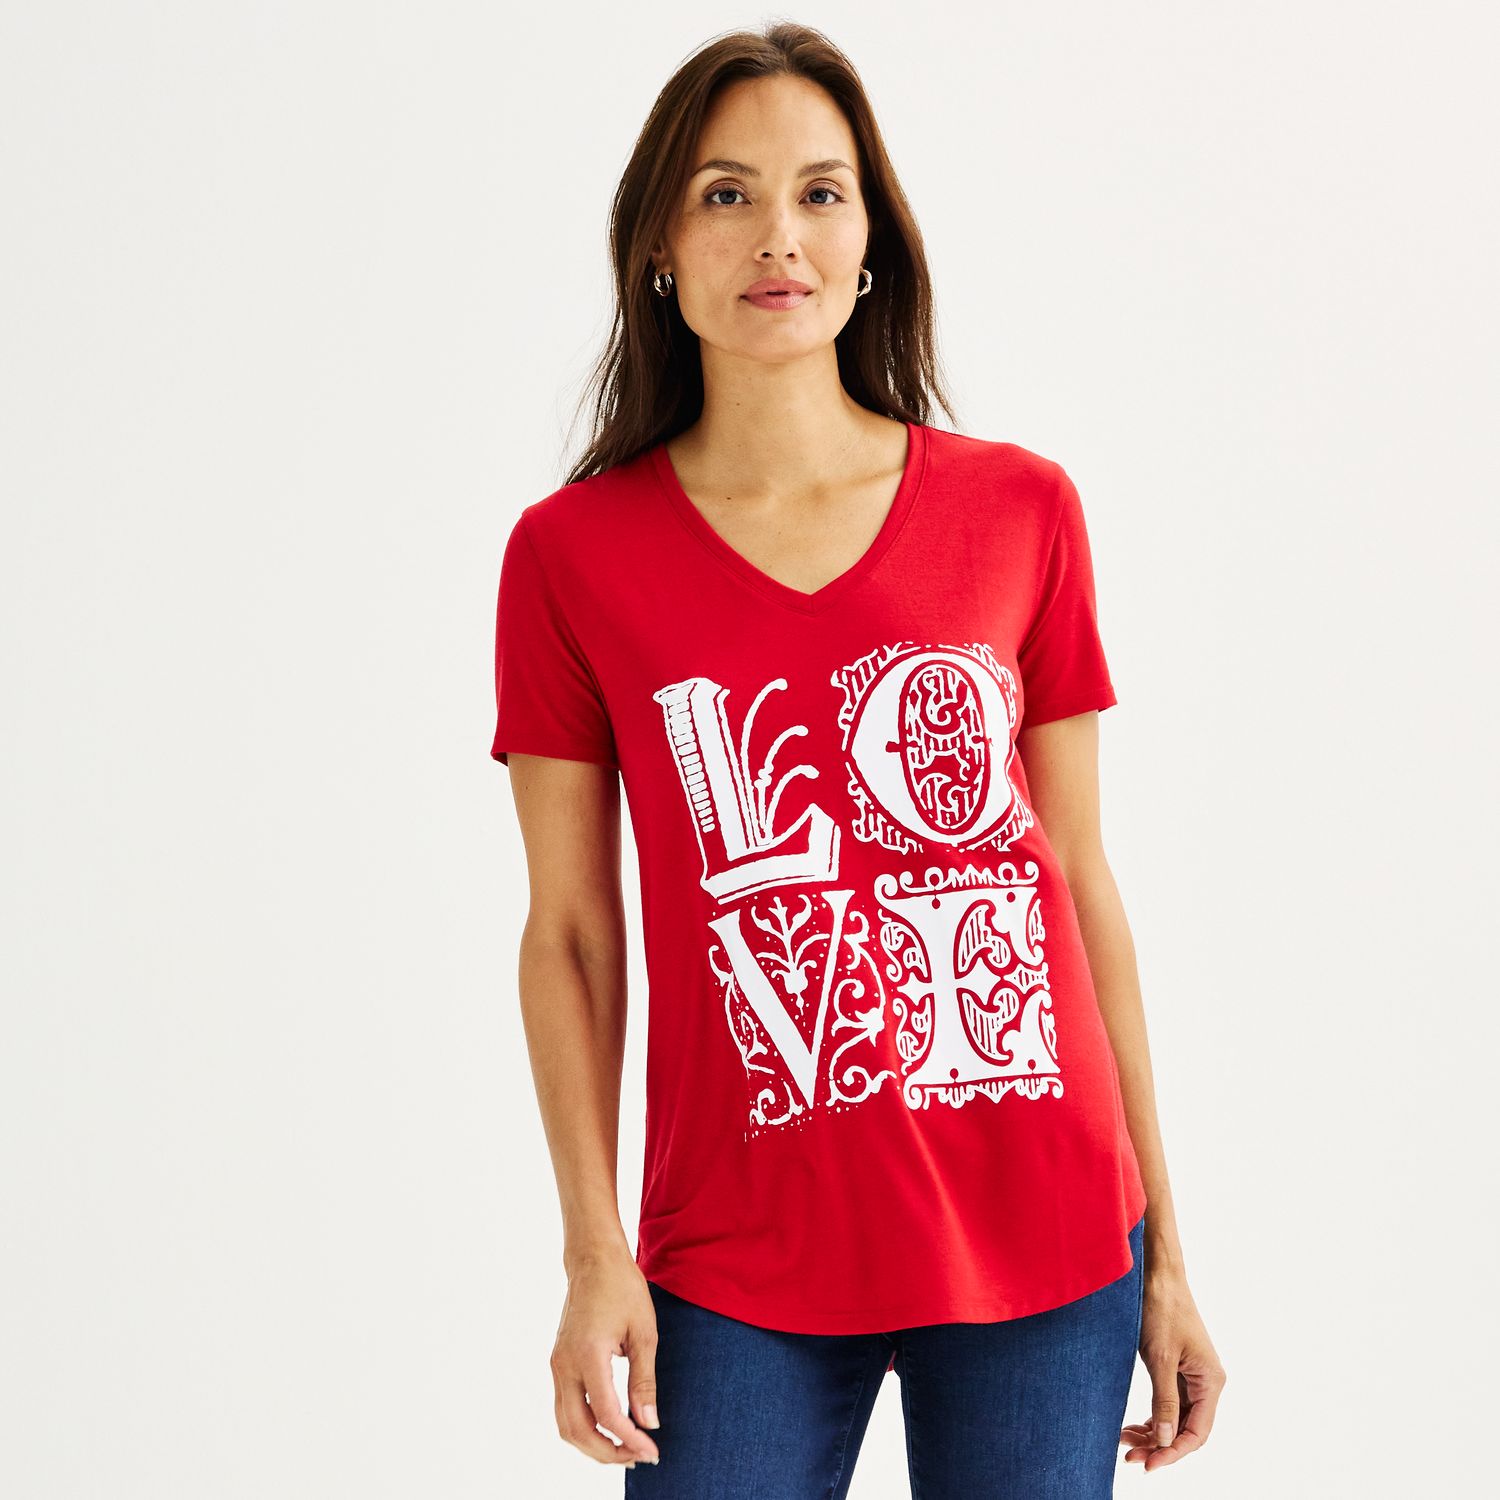 For a laid-back, fun option, choose a Valentine's Day graphic tee for your February 14 look.